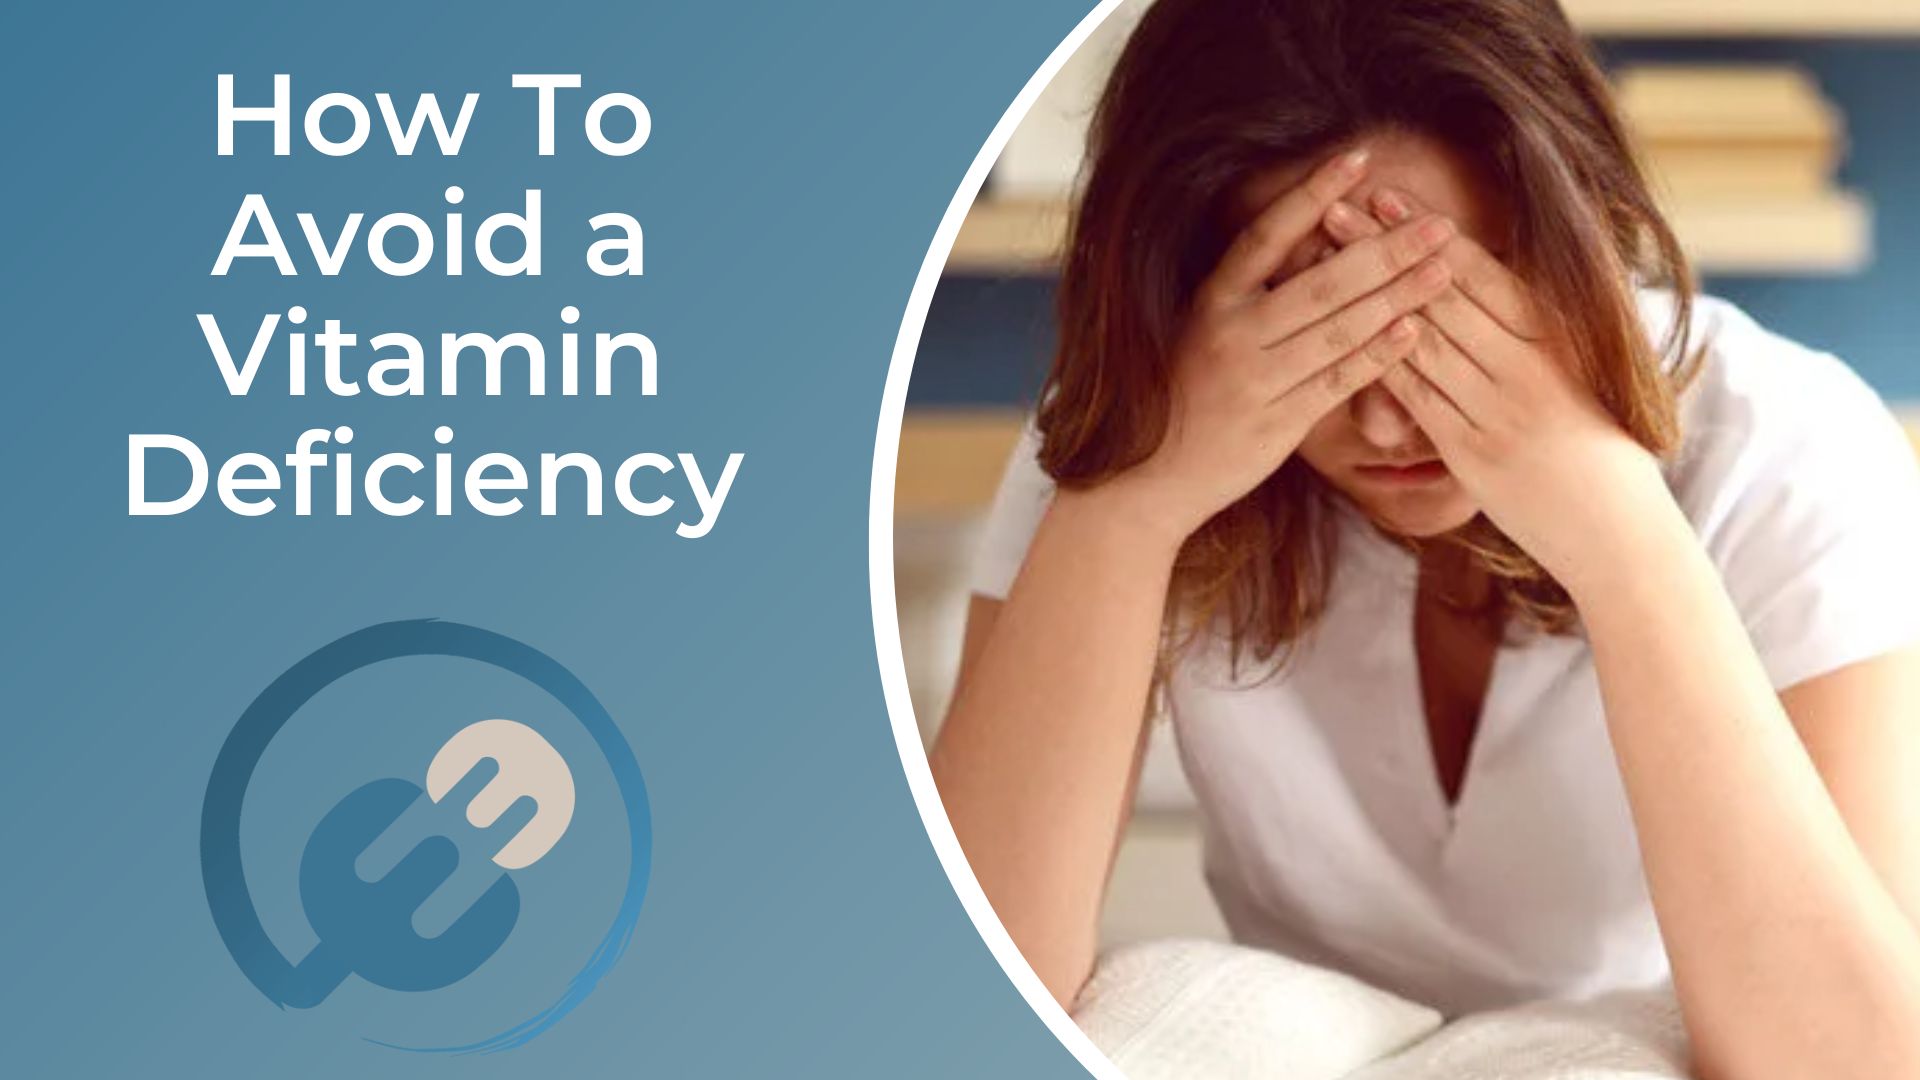 How To Avoid a Vitamin Deficiency